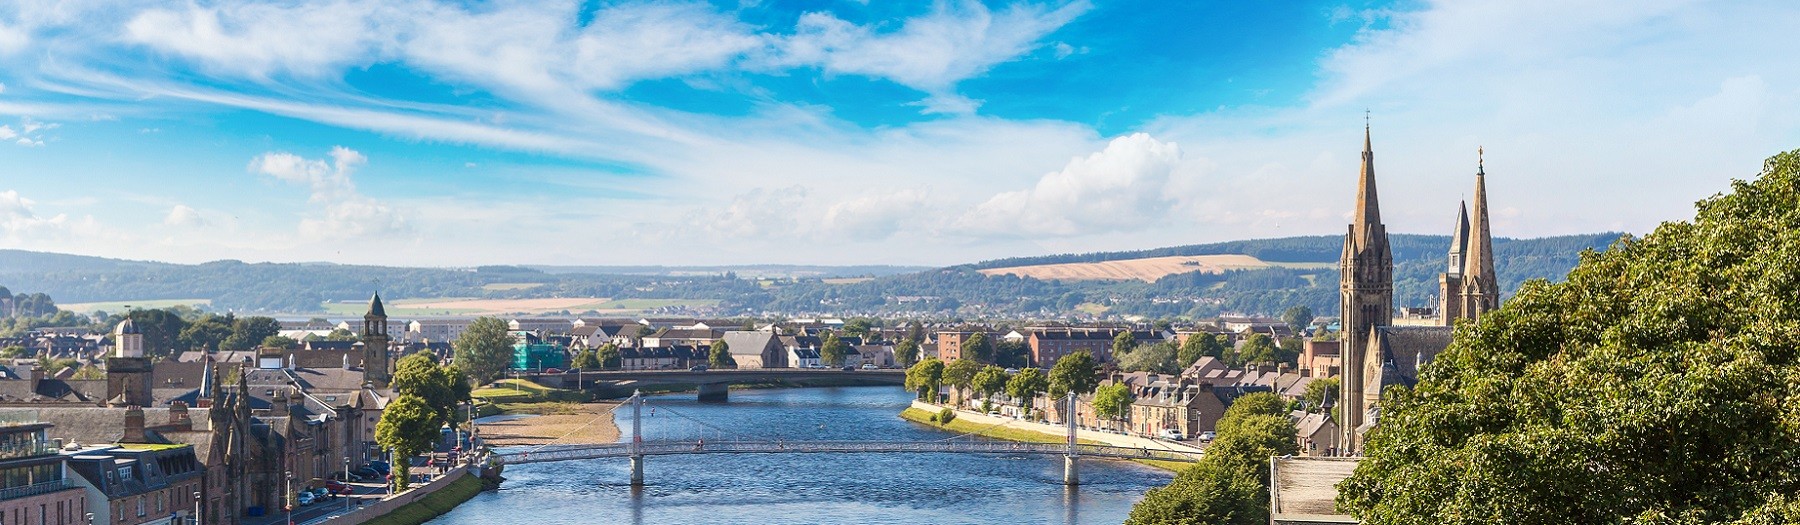 Inverness city image with river